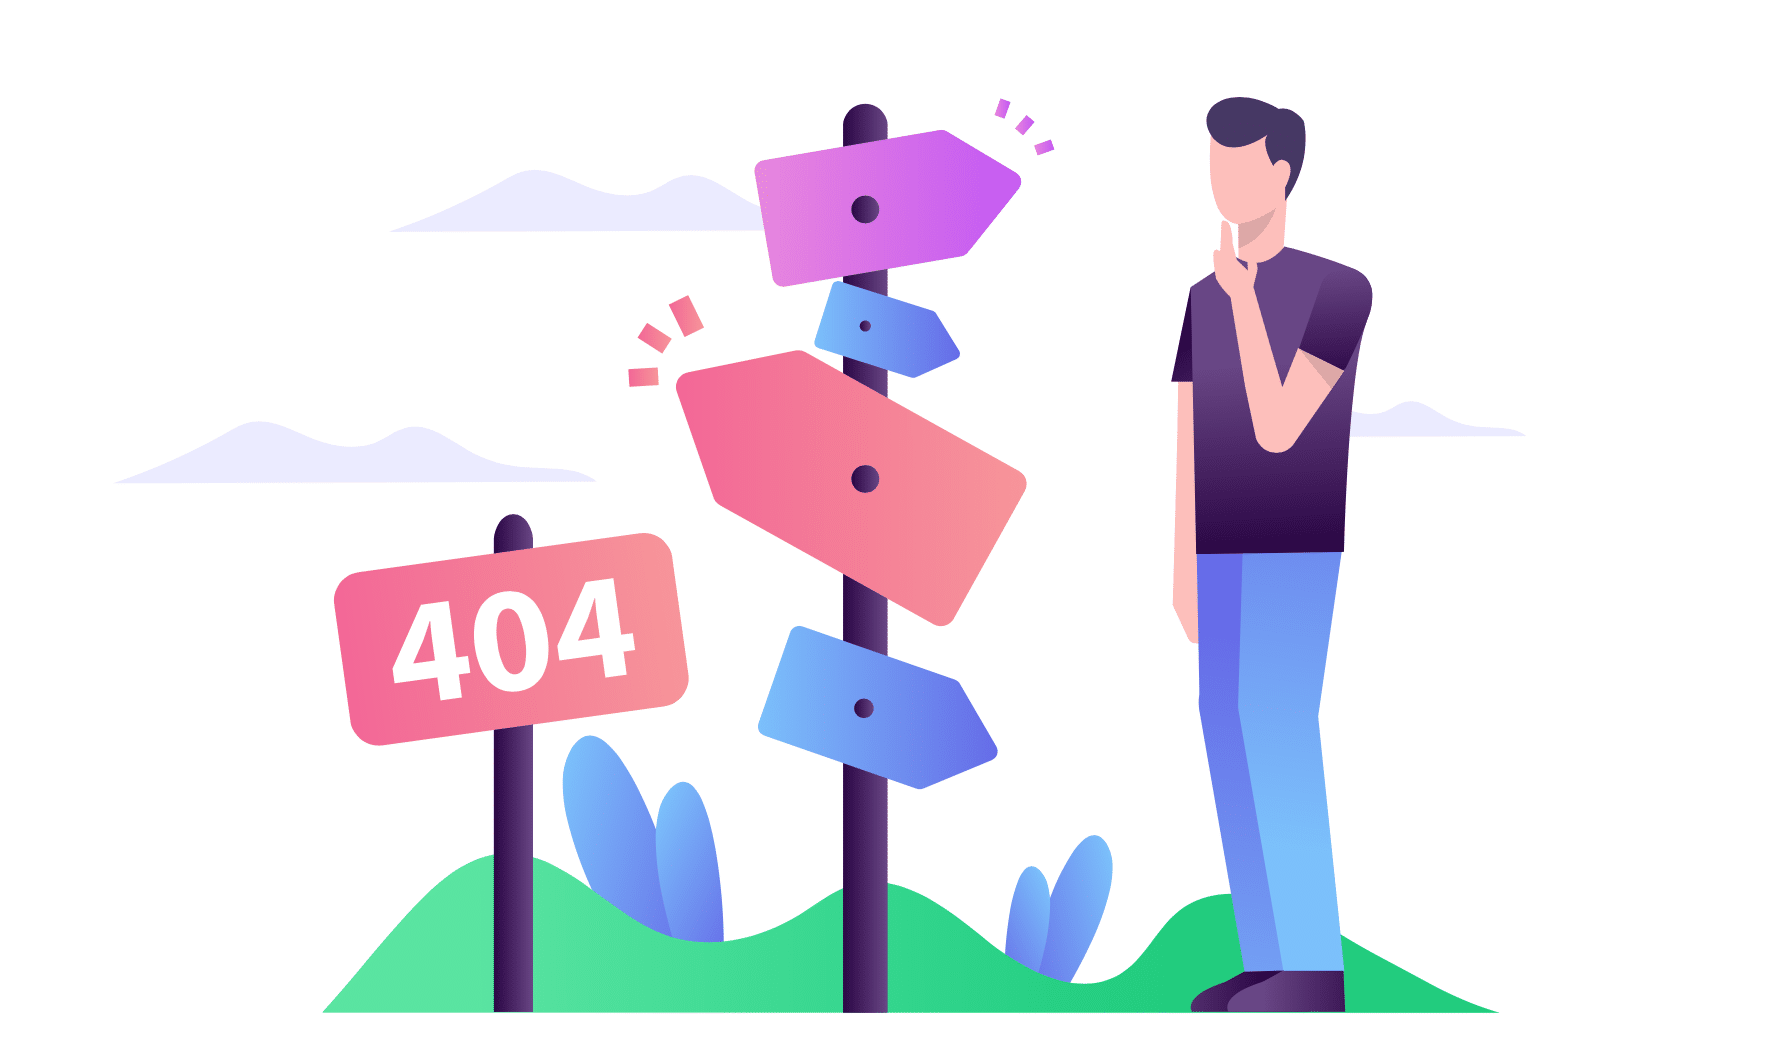 Redirect 404 Not Found pages to homepage in WordPress